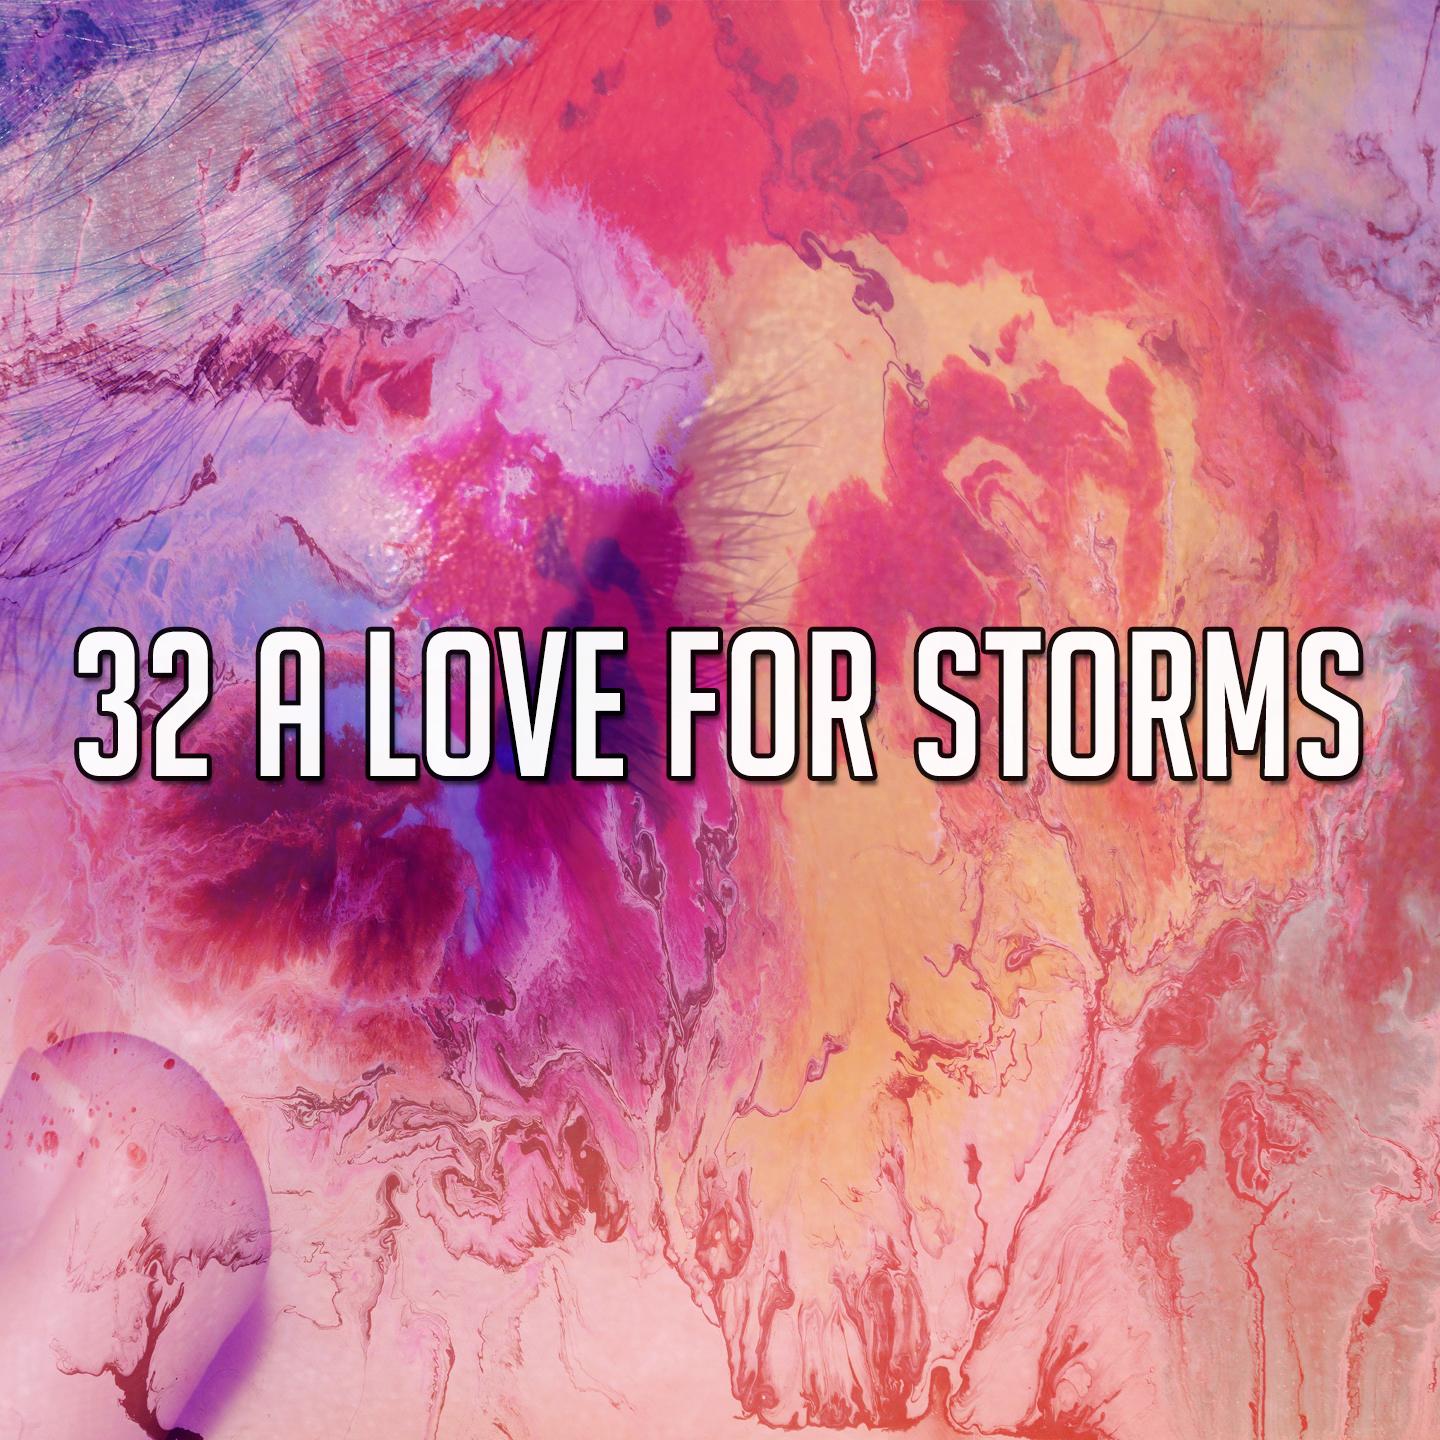 32 A Love for Storms